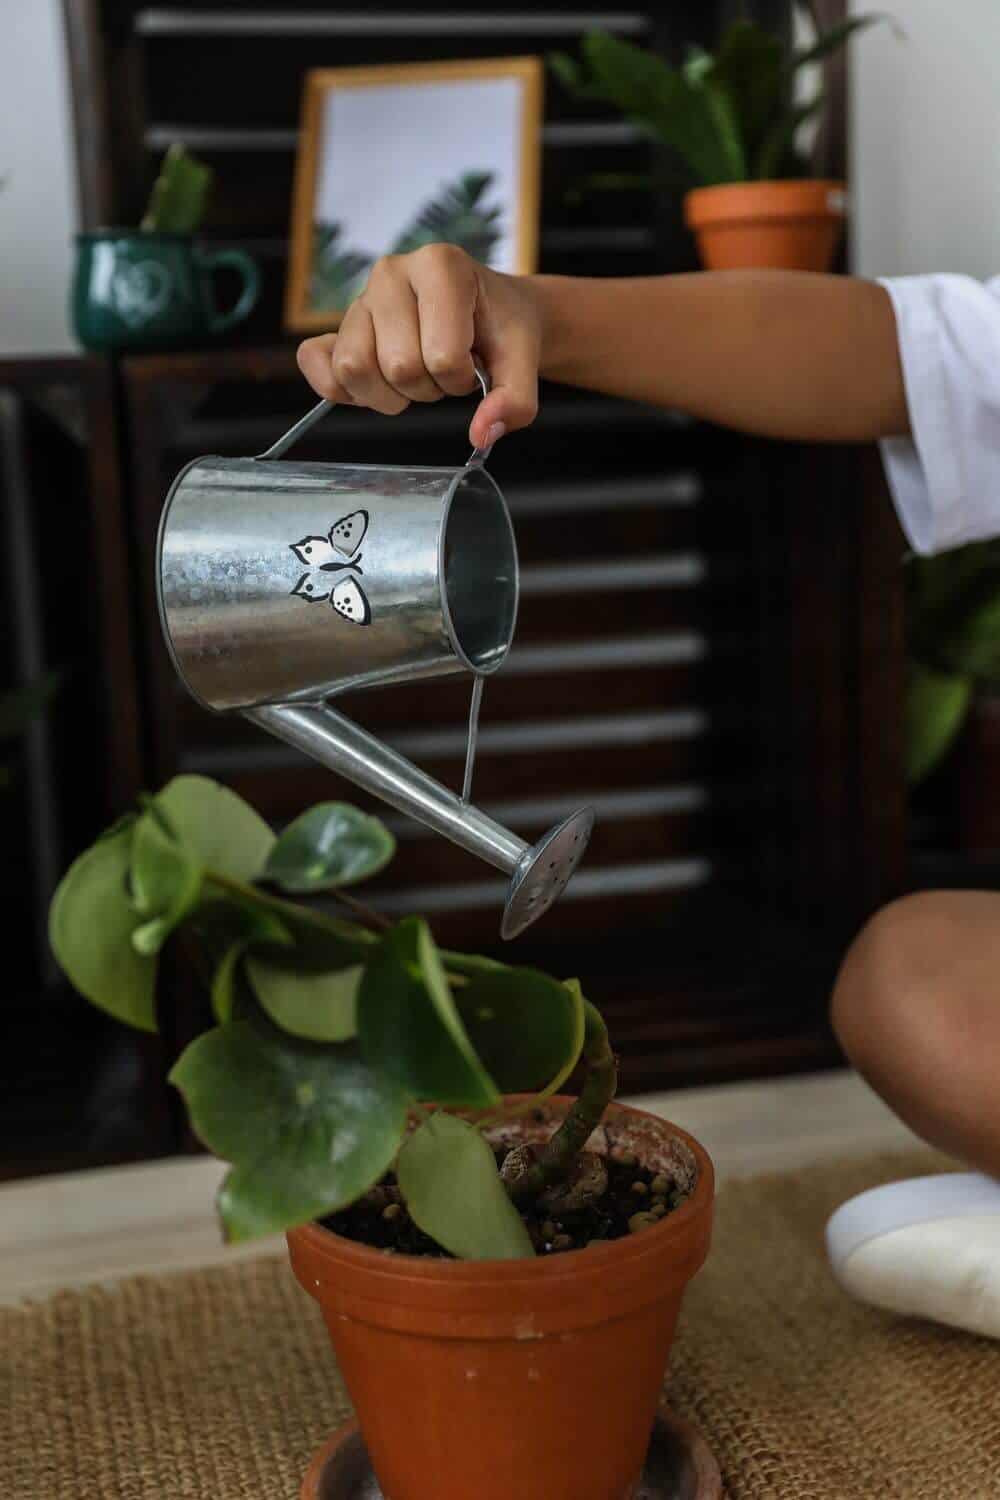 Watering plants in a pot with water can